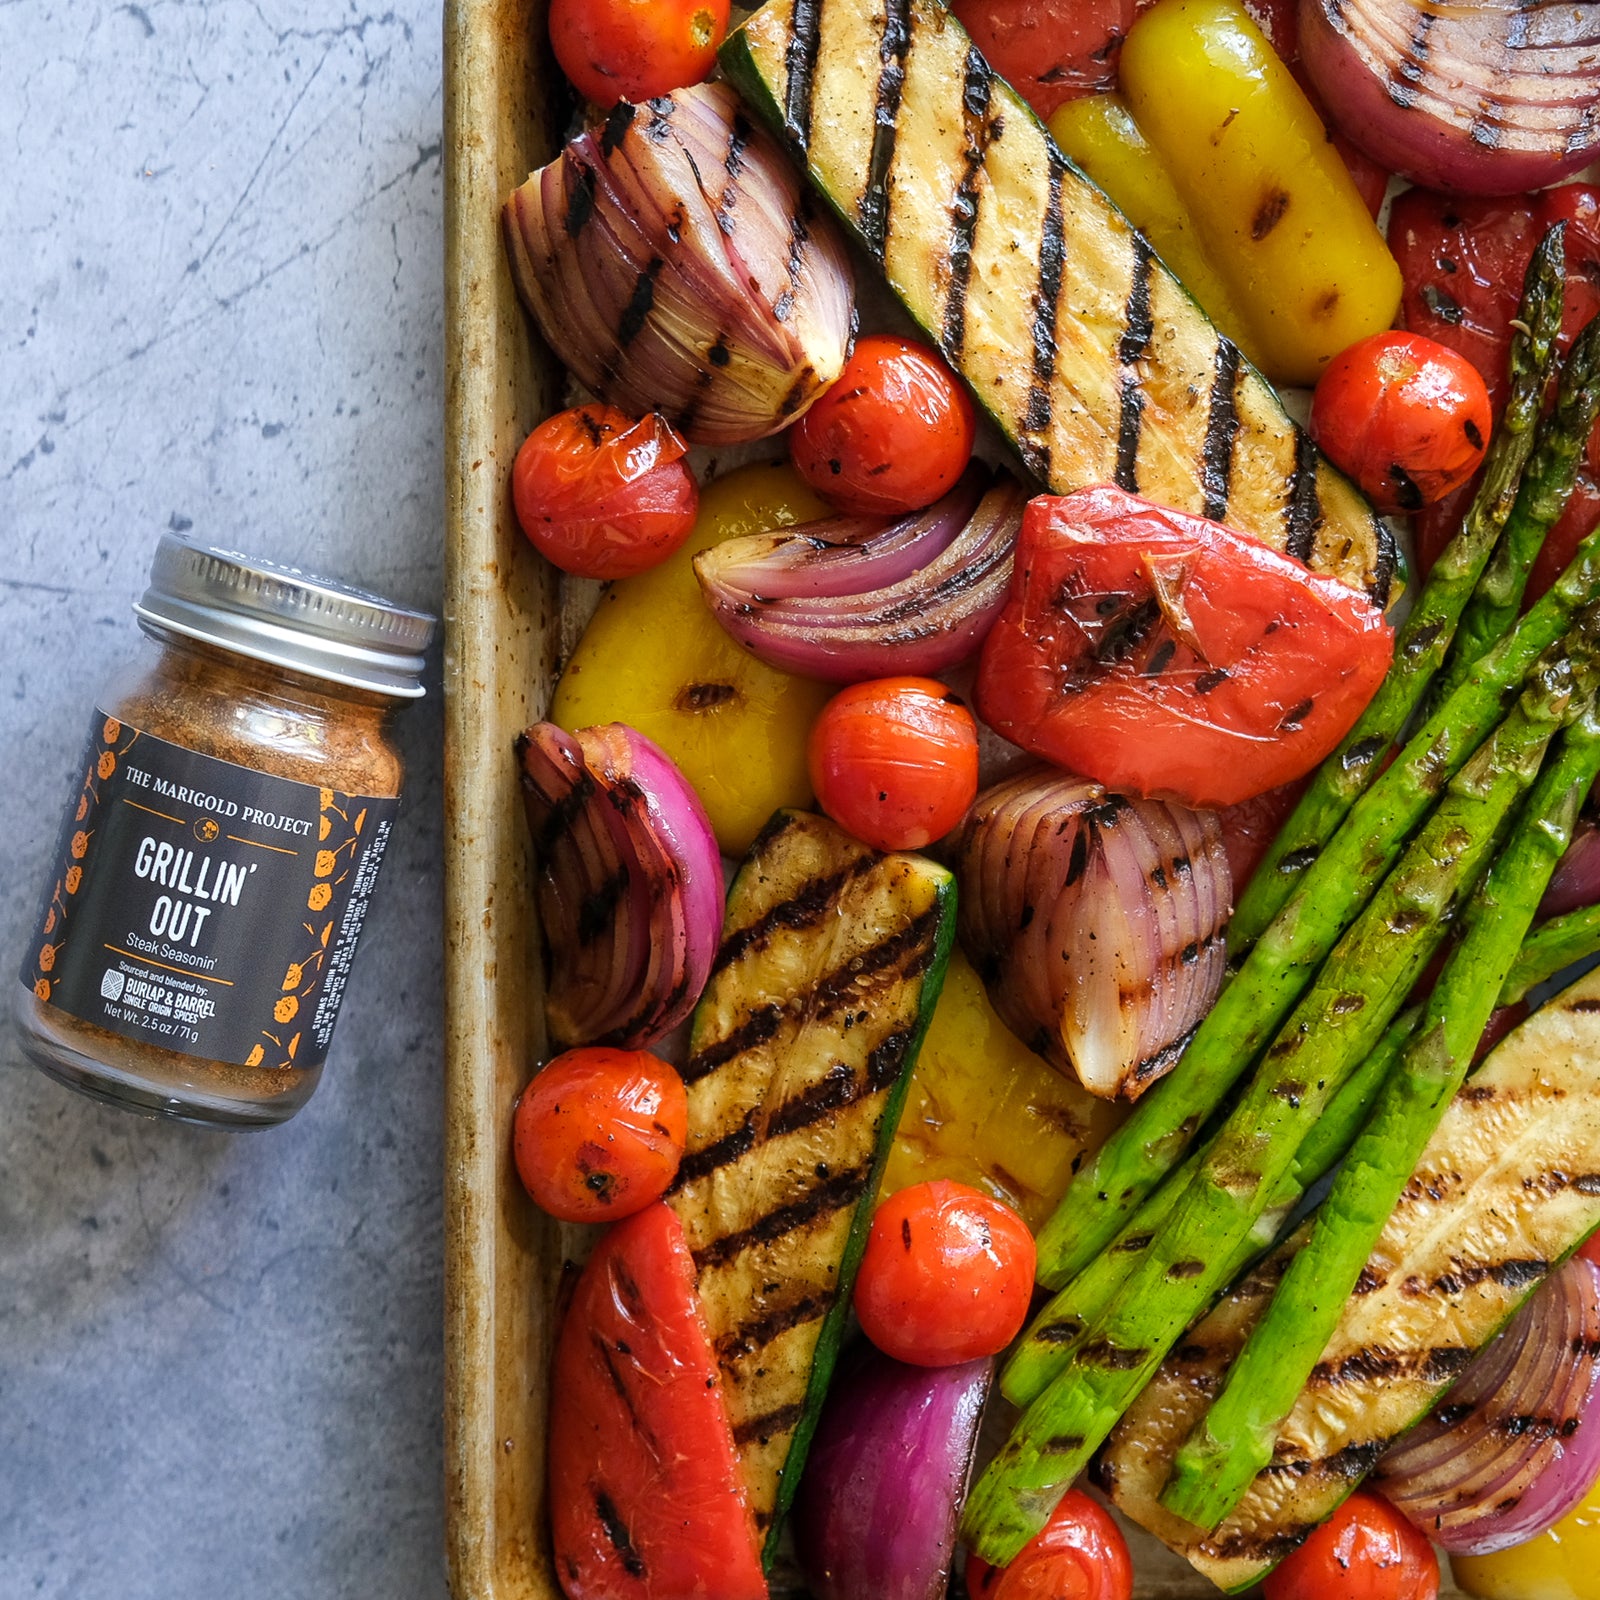 Grillin’ Out Marinade